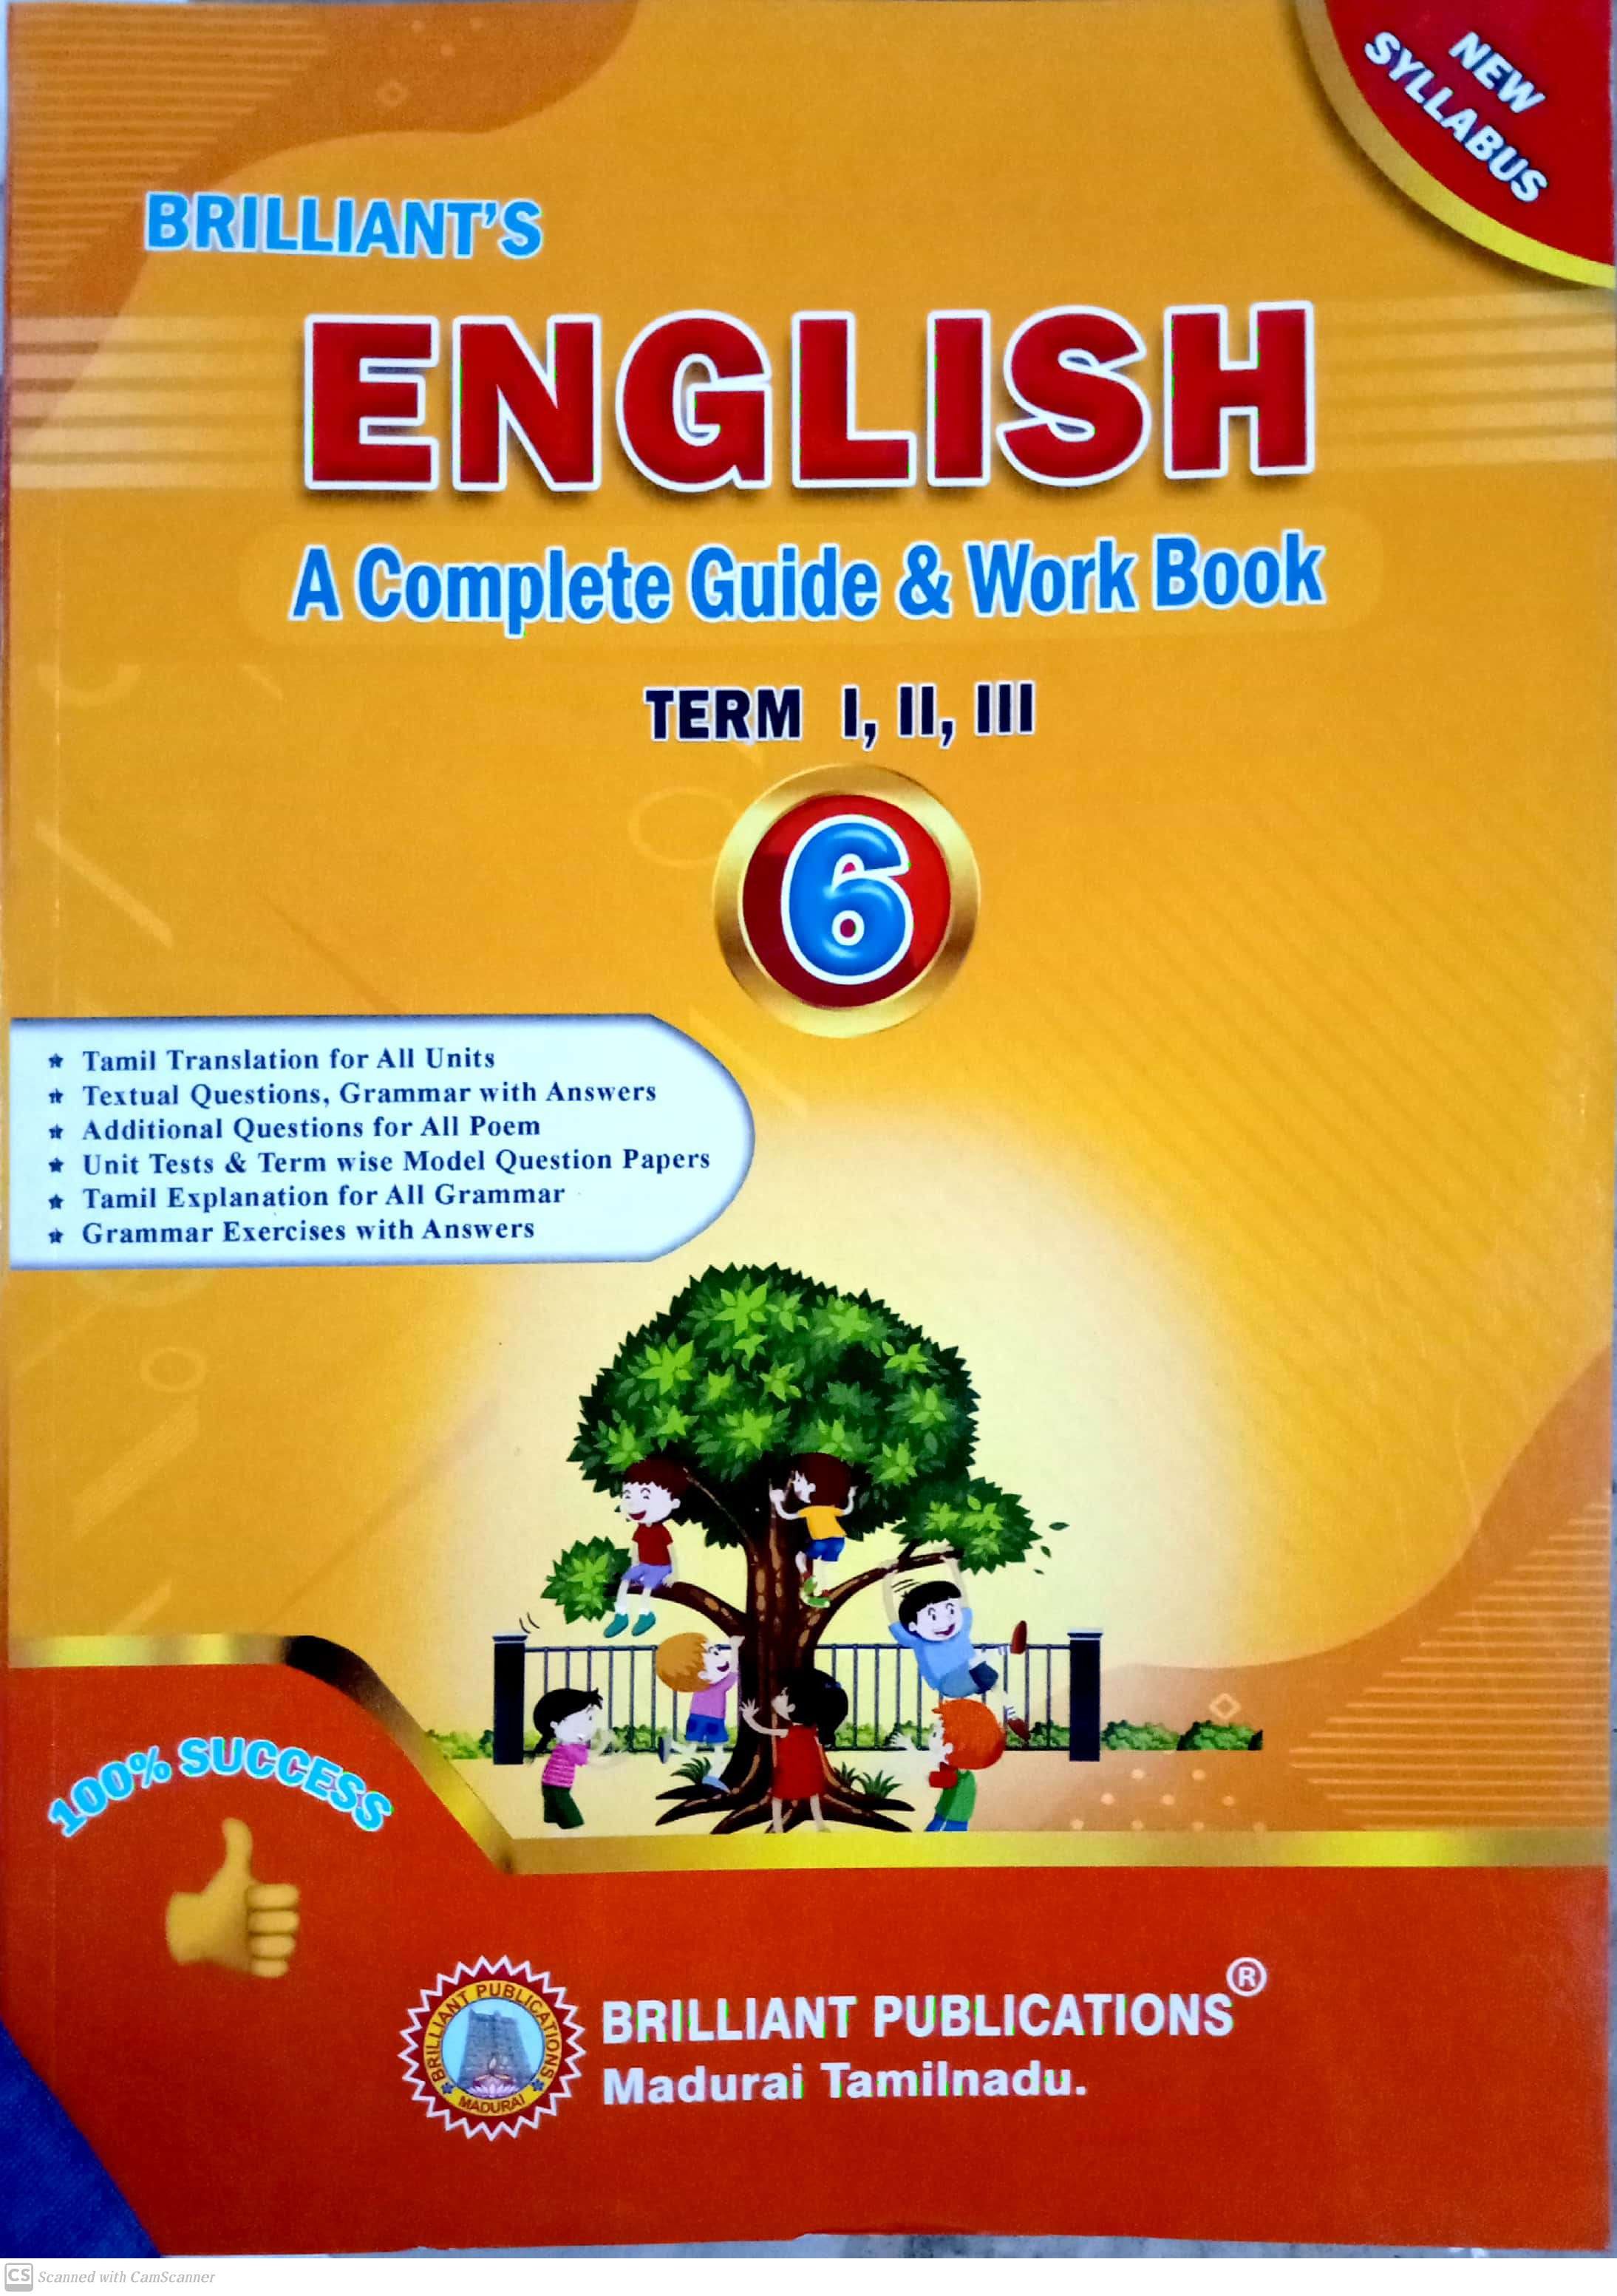 routemybook-buy-6th-standard-english-a-complete-guide-work-book-guide-based-on-the-new